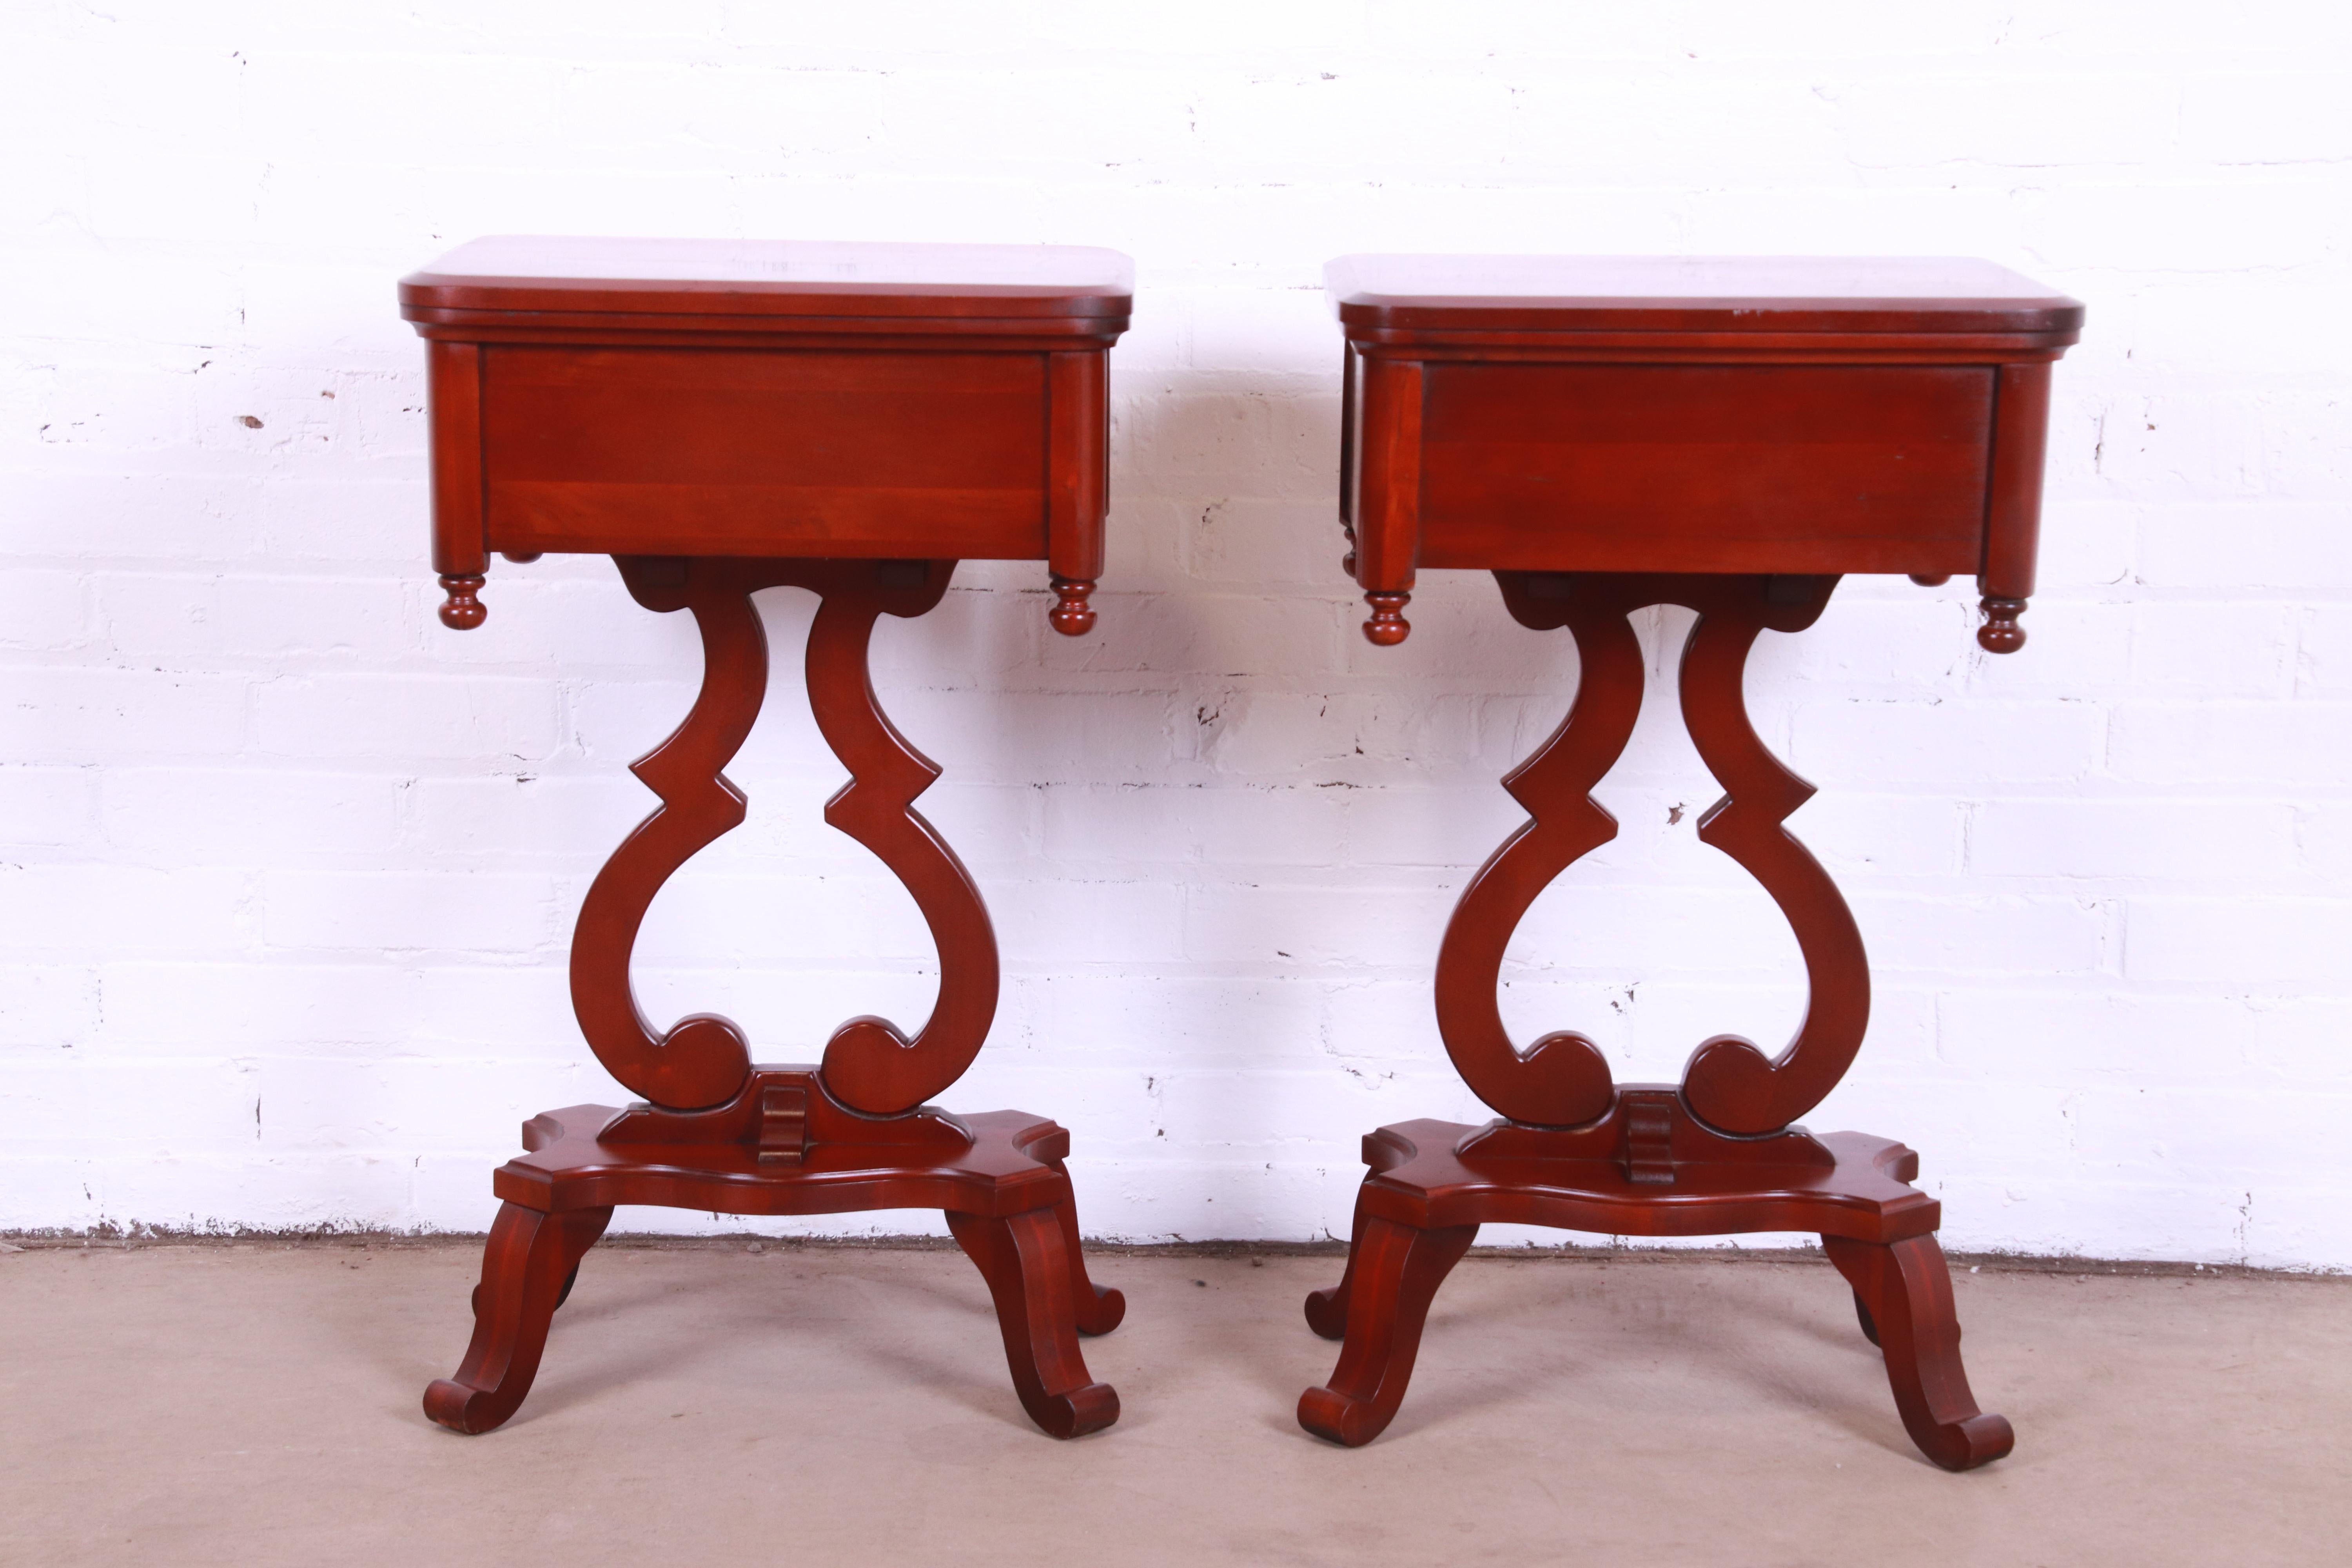 Lillian Russell Collection Victorian Cherry Nightstands by Davis Cabinet Co. 9